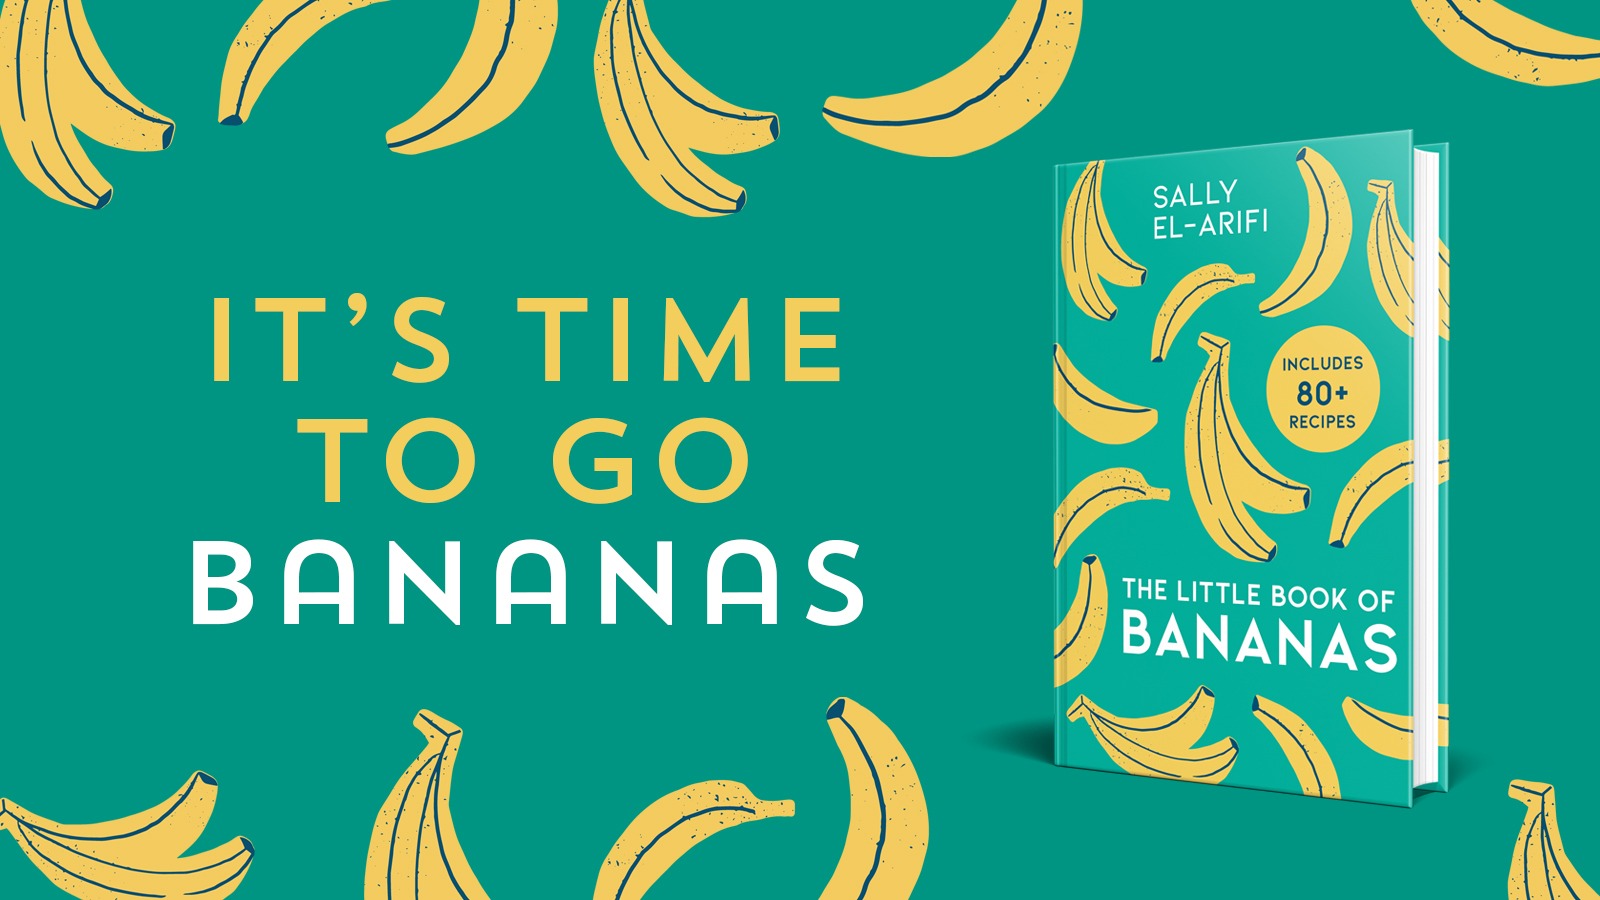 The Little Book of Bananas